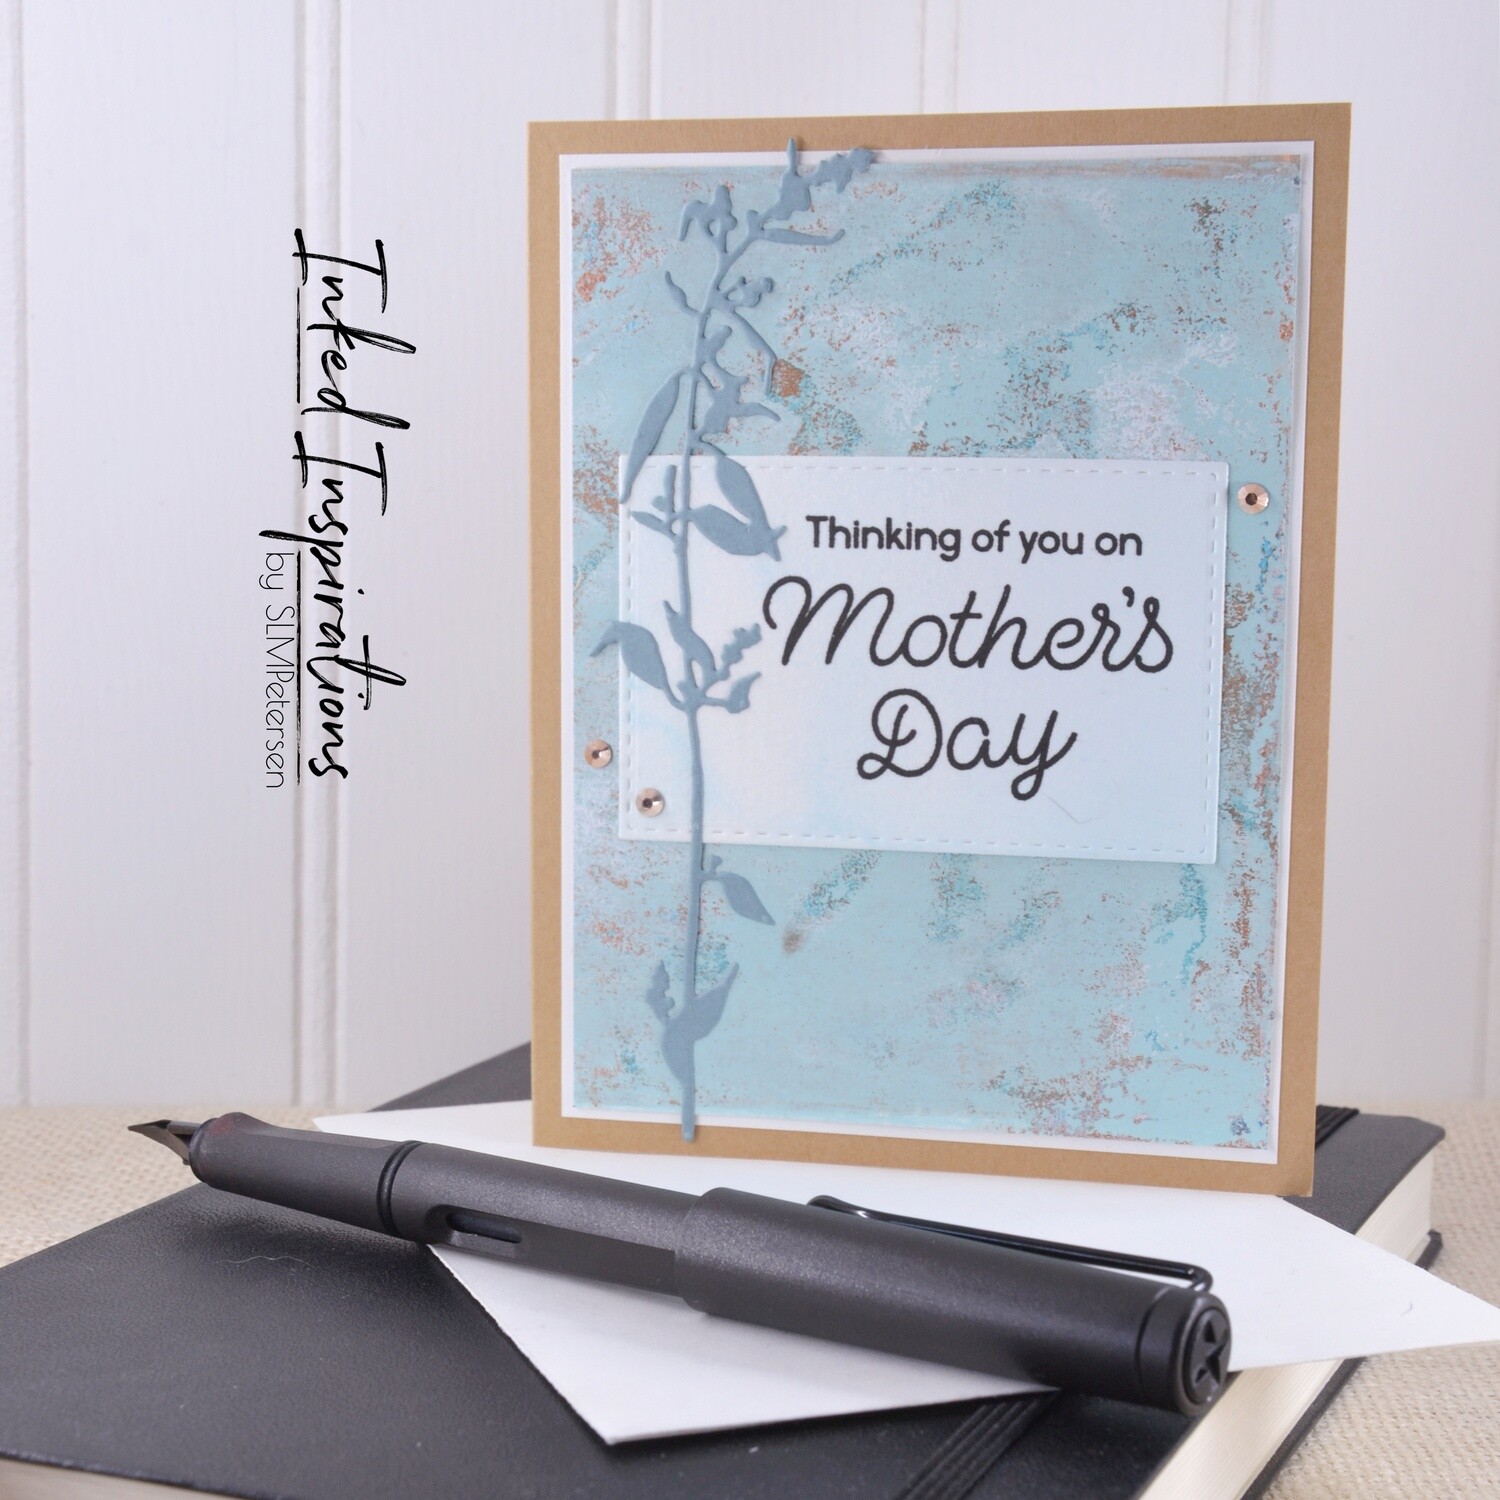 Thinking of You On Mother's Day - Copper & Teal